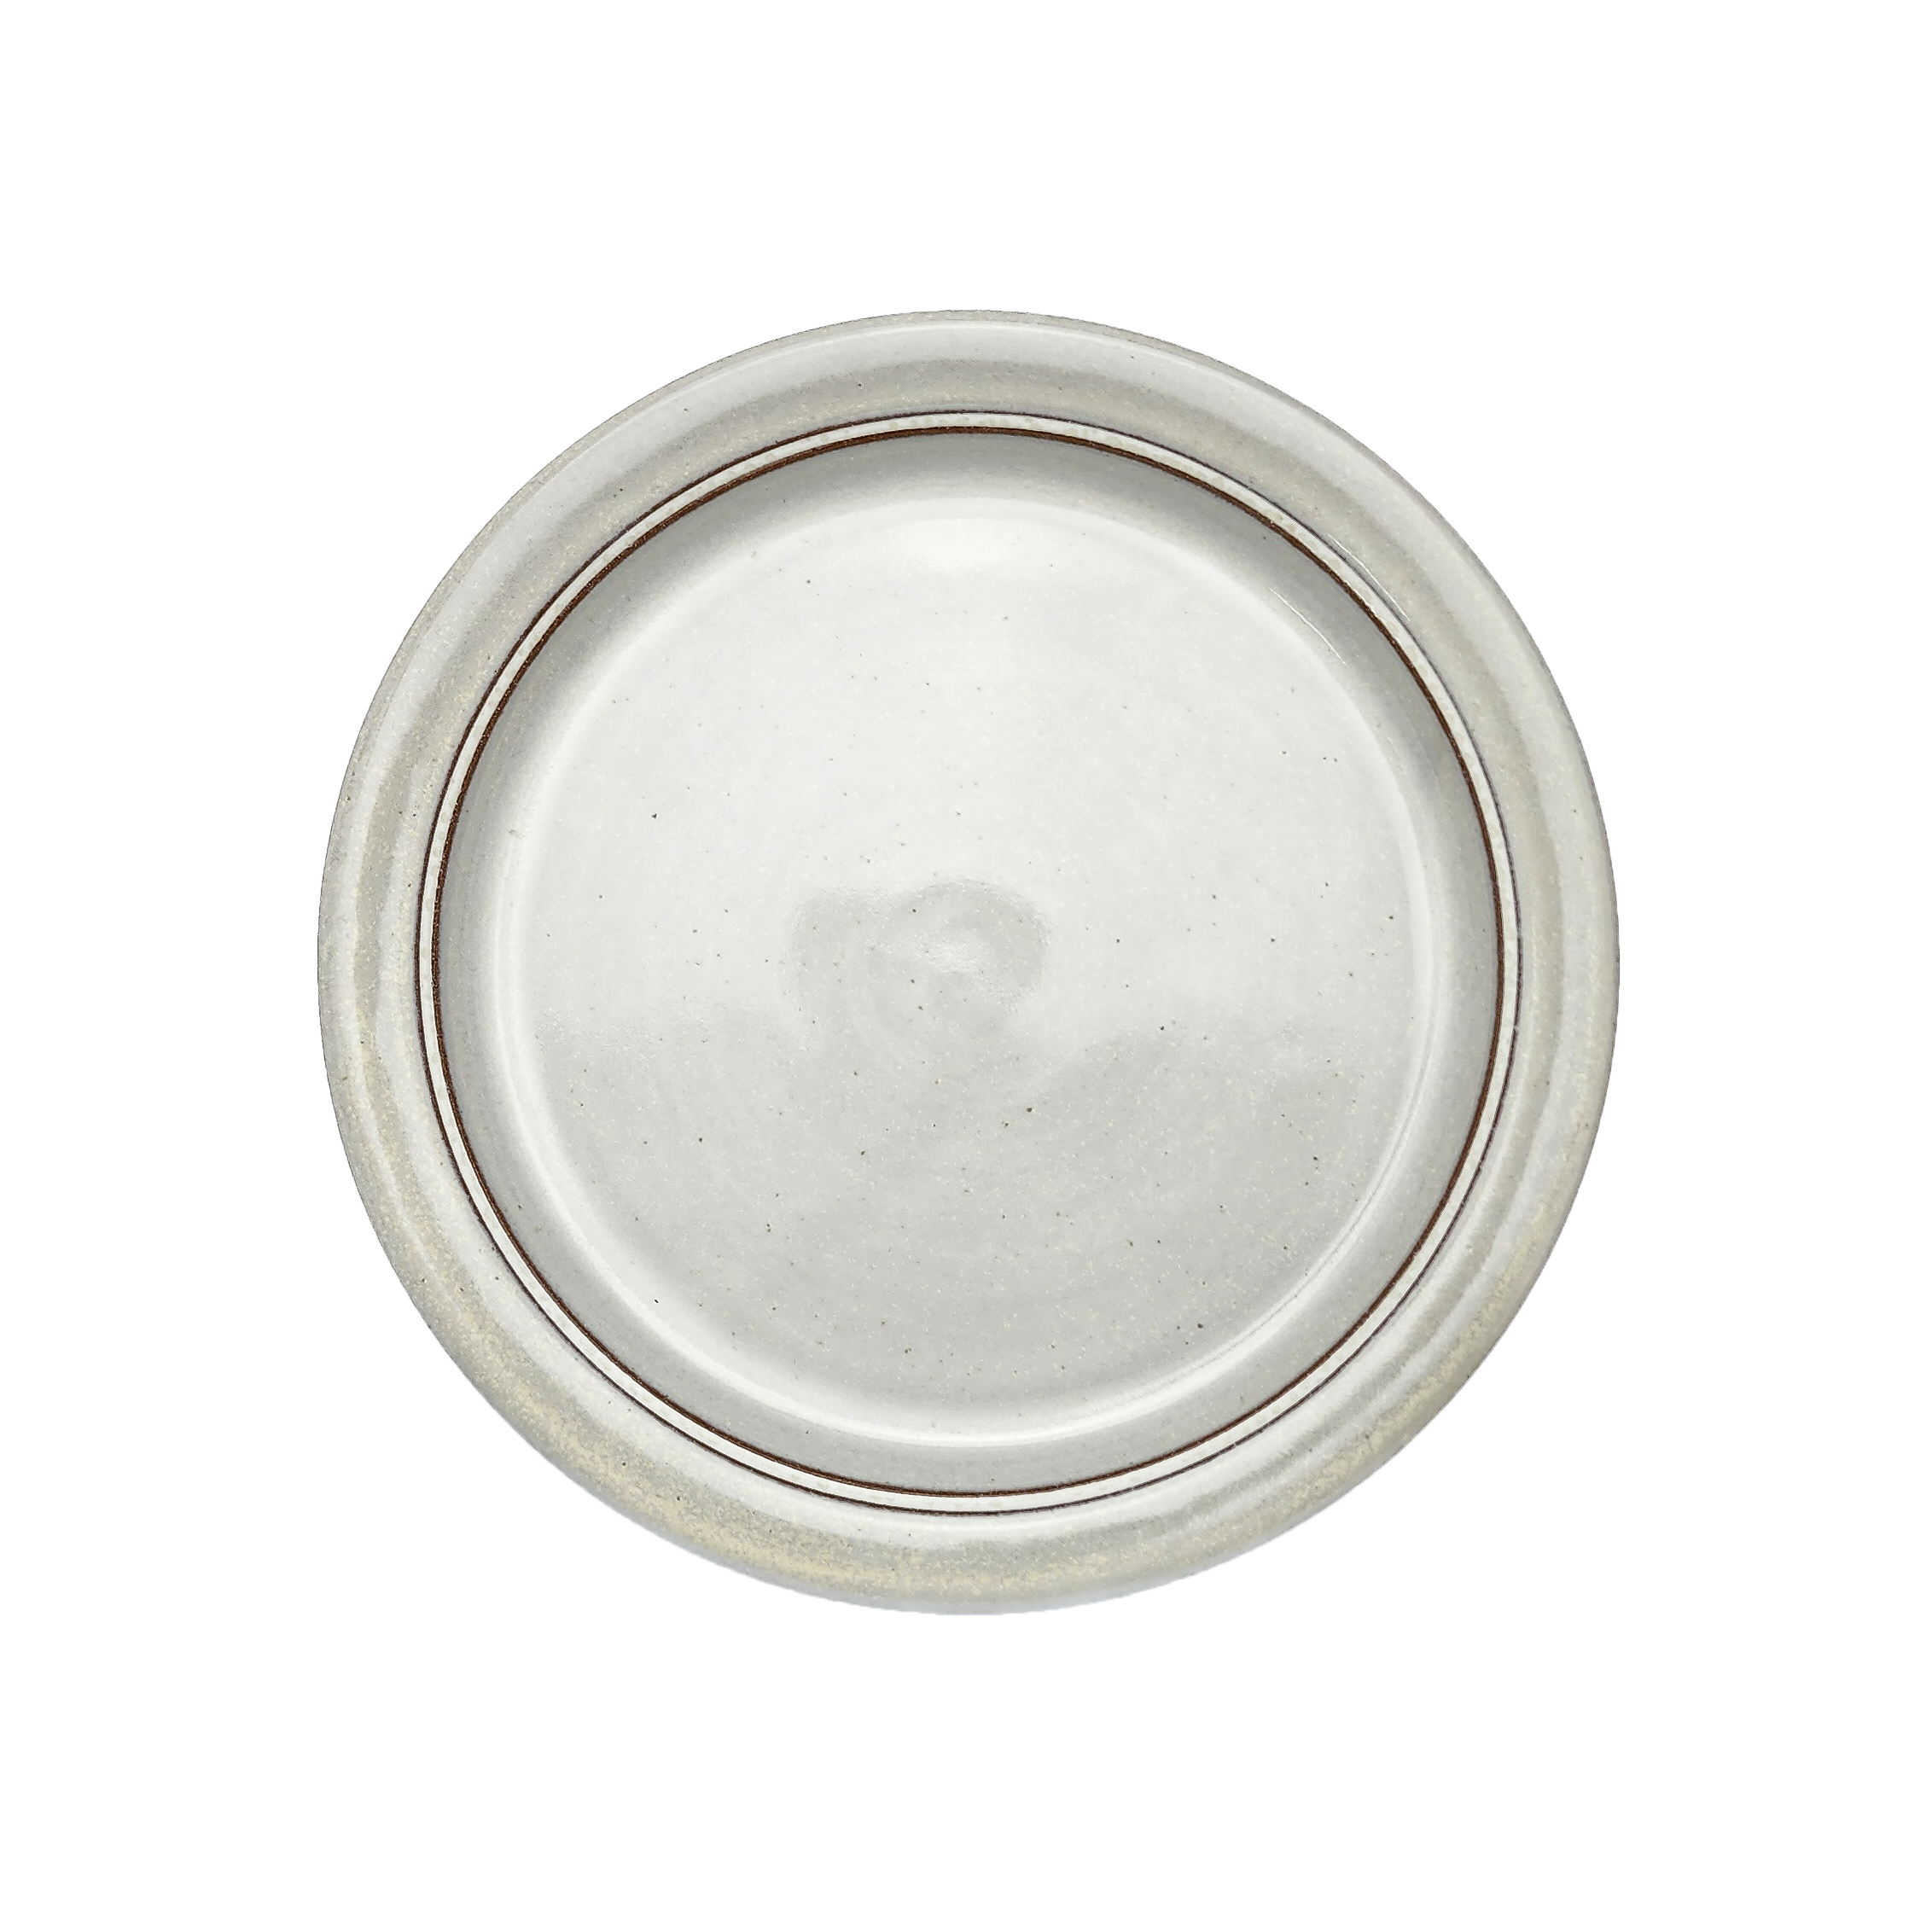 Image Description: A classic white dinner plate from Clinton Pottery's Handmade Dinnerware Collection. The 10-inch plate features a clean and timeless glaze, adding a touch of simplicity and elegance to your dining setting. Its ample size makes it perfect for serving a delightful dinner with a versatile and classic aesthetic.